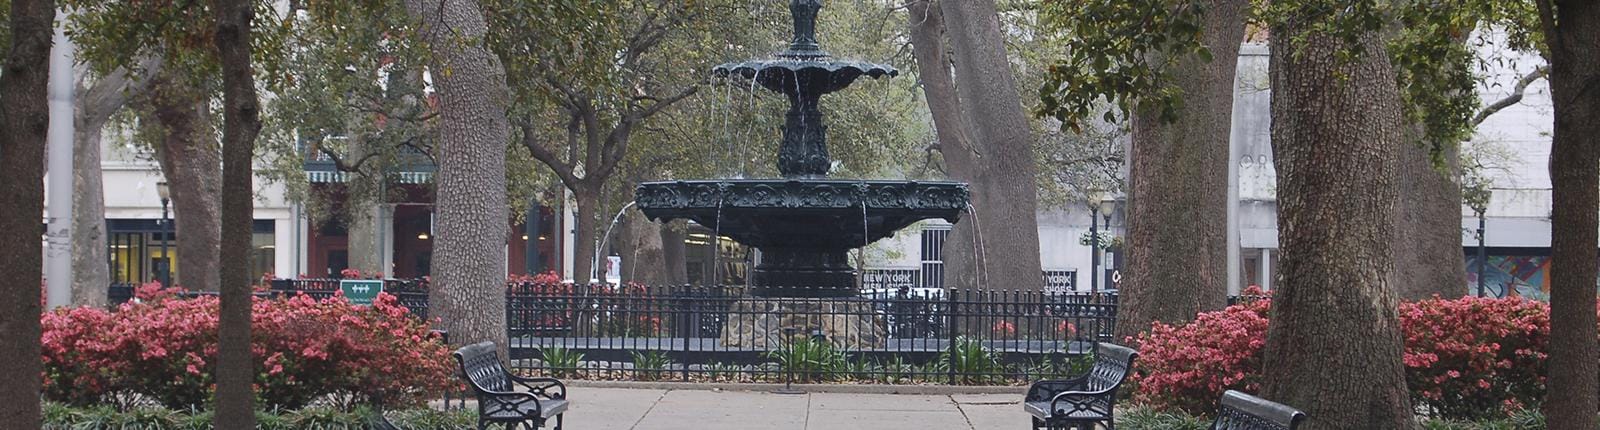 Beautiful and tranquil view of a large black fountain found in Bienville Square in Mobile, AL